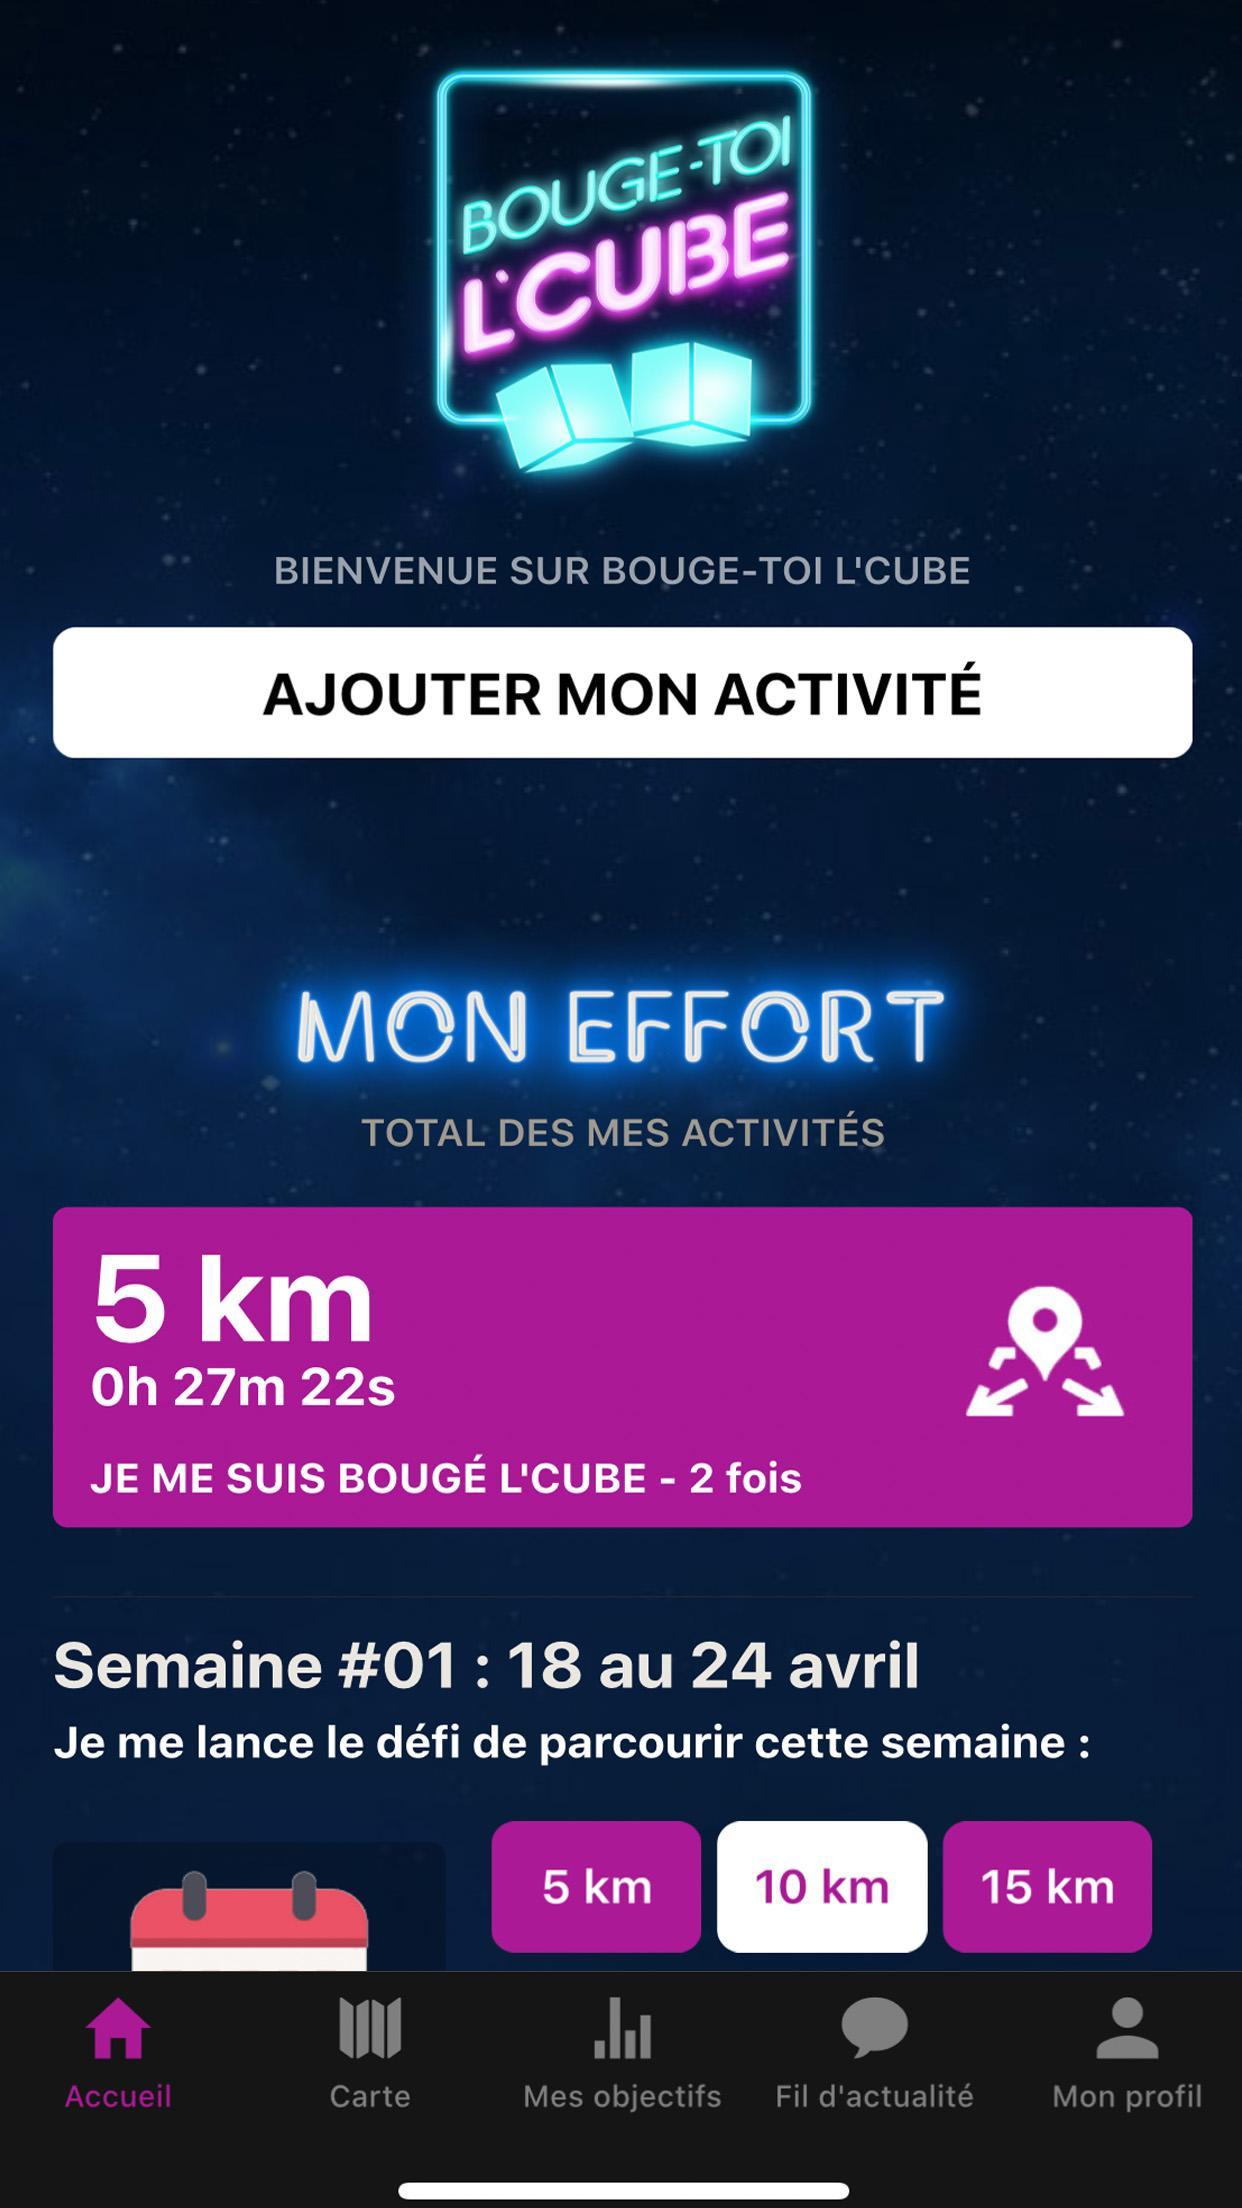 Bouge-toi l'Cube for Android - APK Download